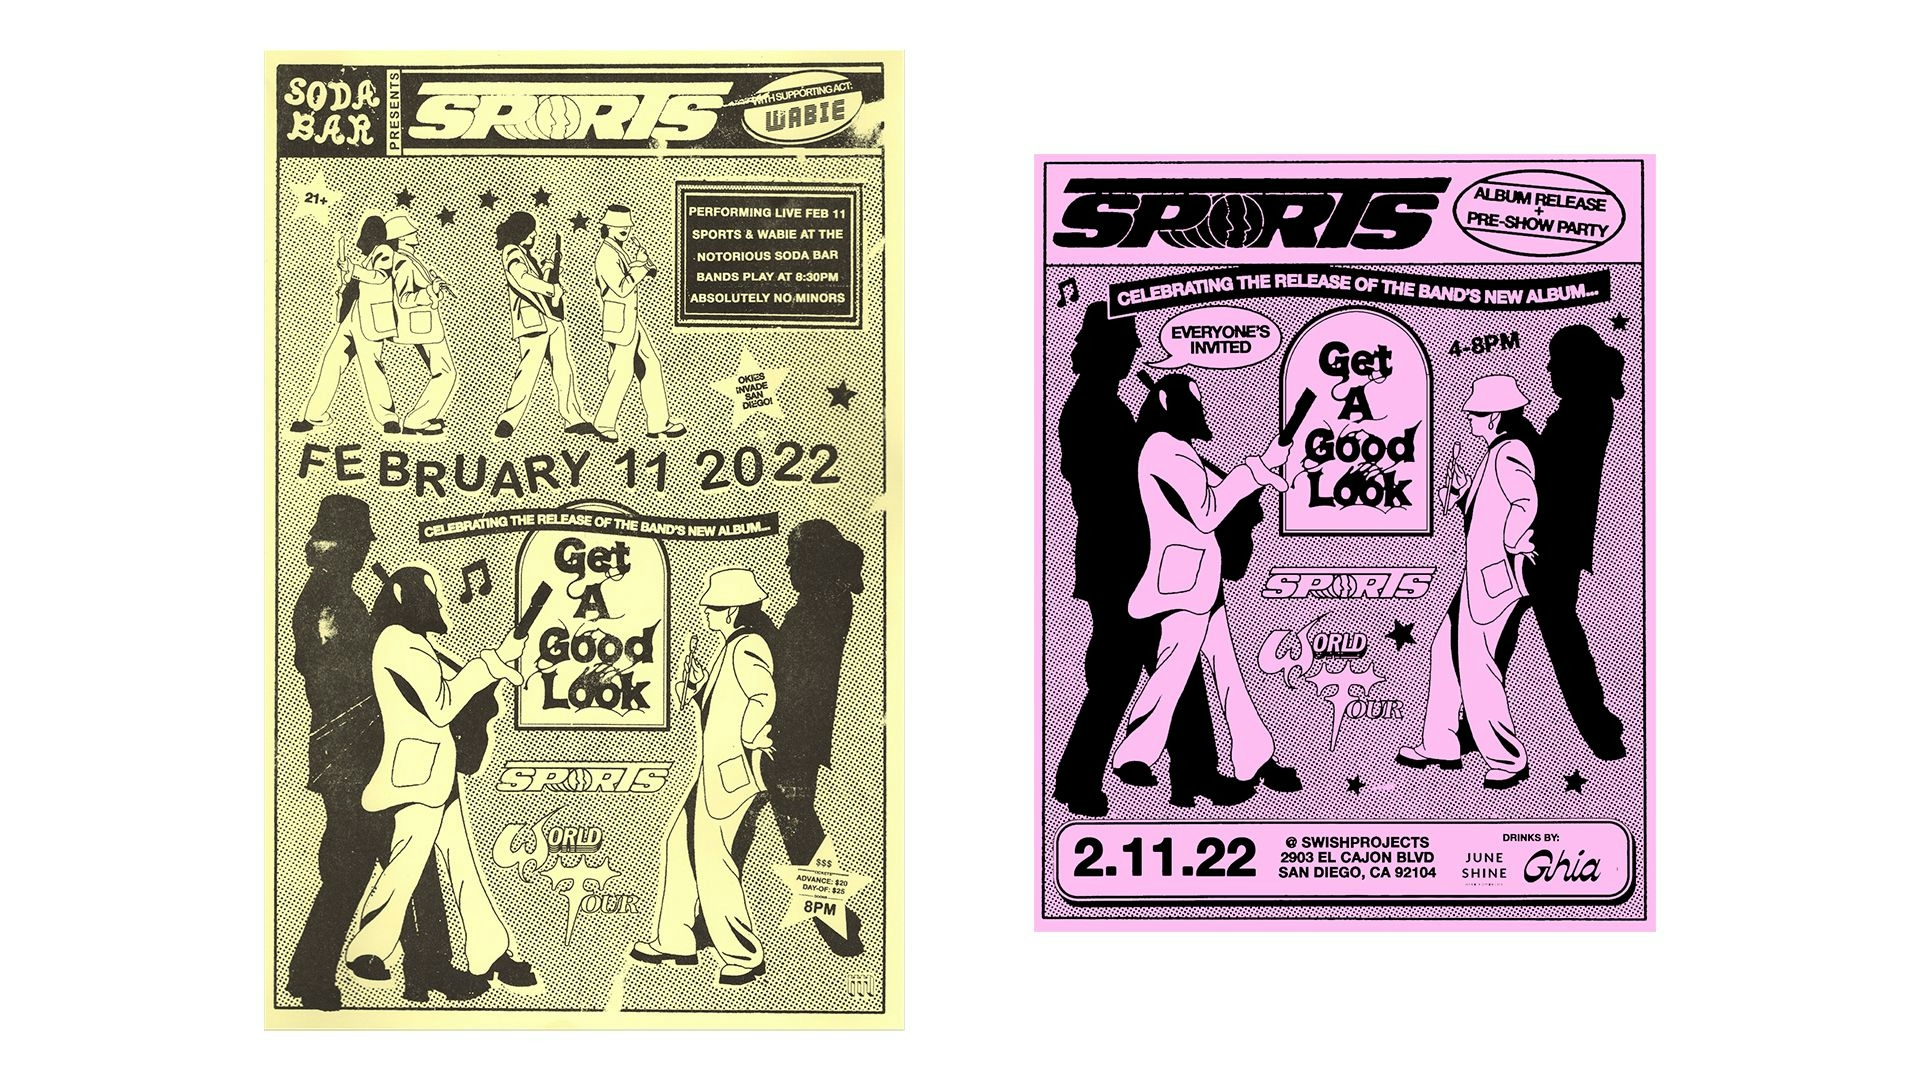 From the Sports Get A Good Look Album Campaign, flyers for the band playing shows in pink and yellow